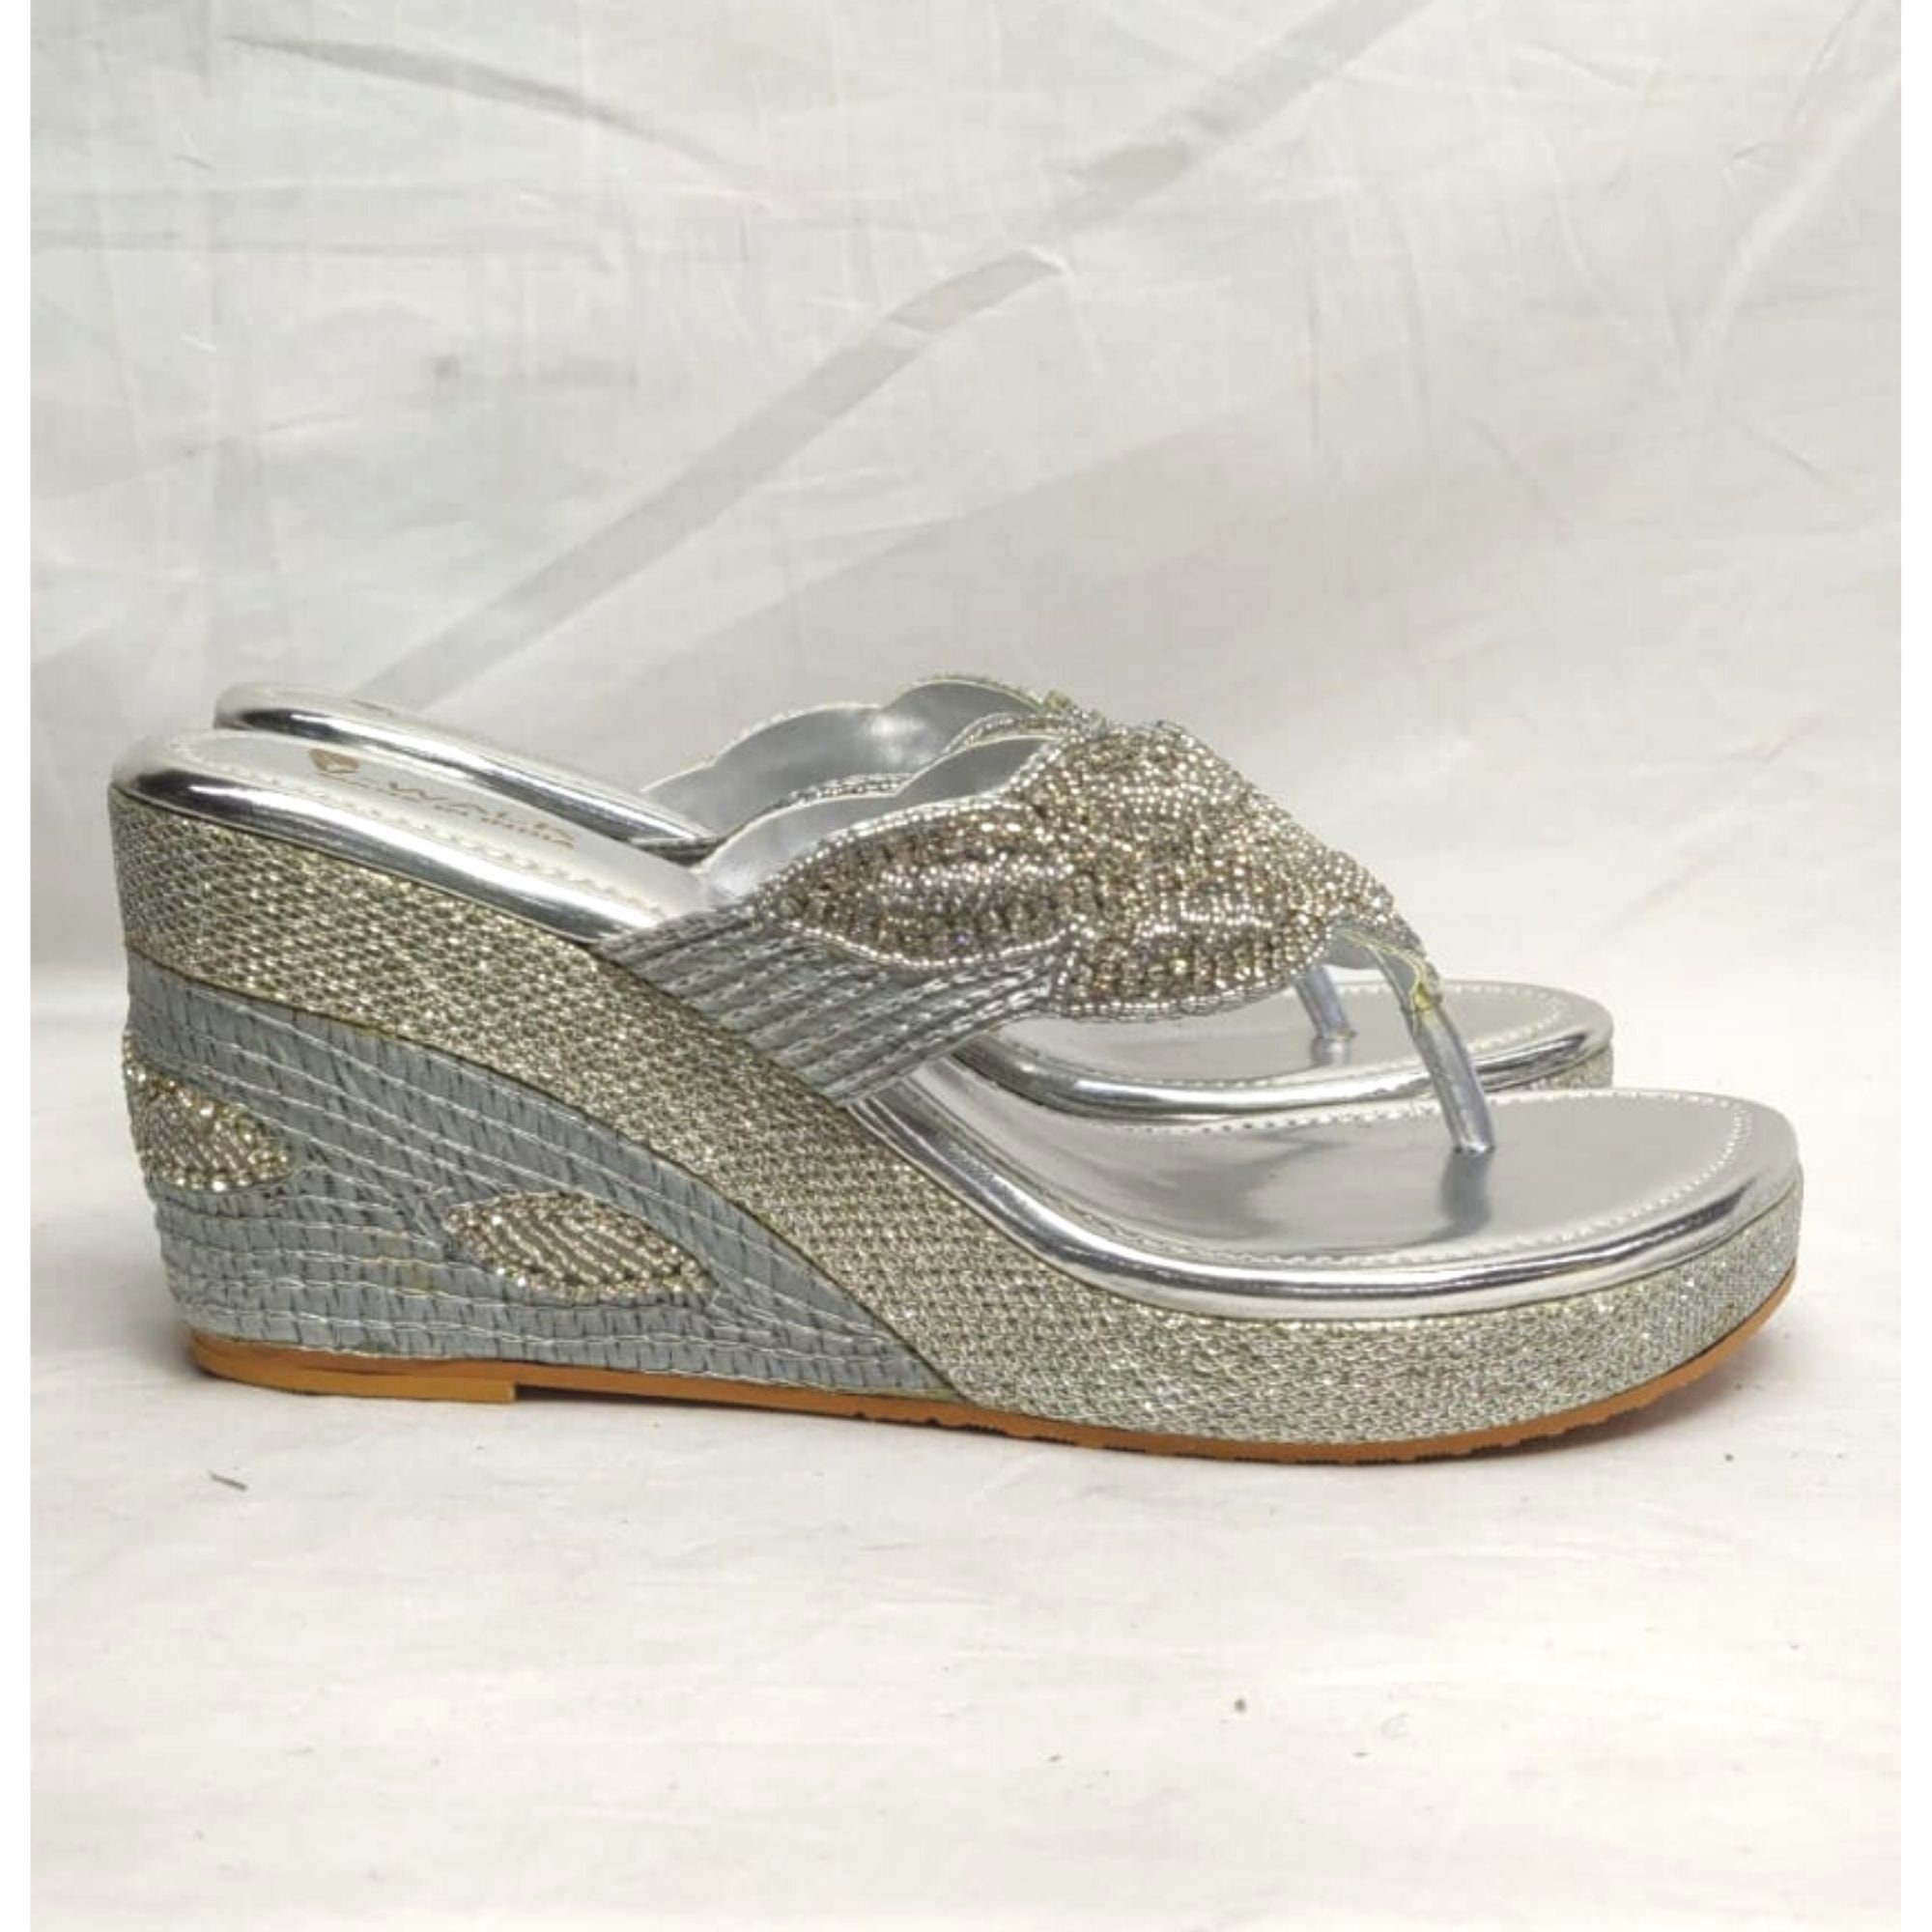 Bridal Shoes in Silver Bridal Wedges Indian Women's - Etsy